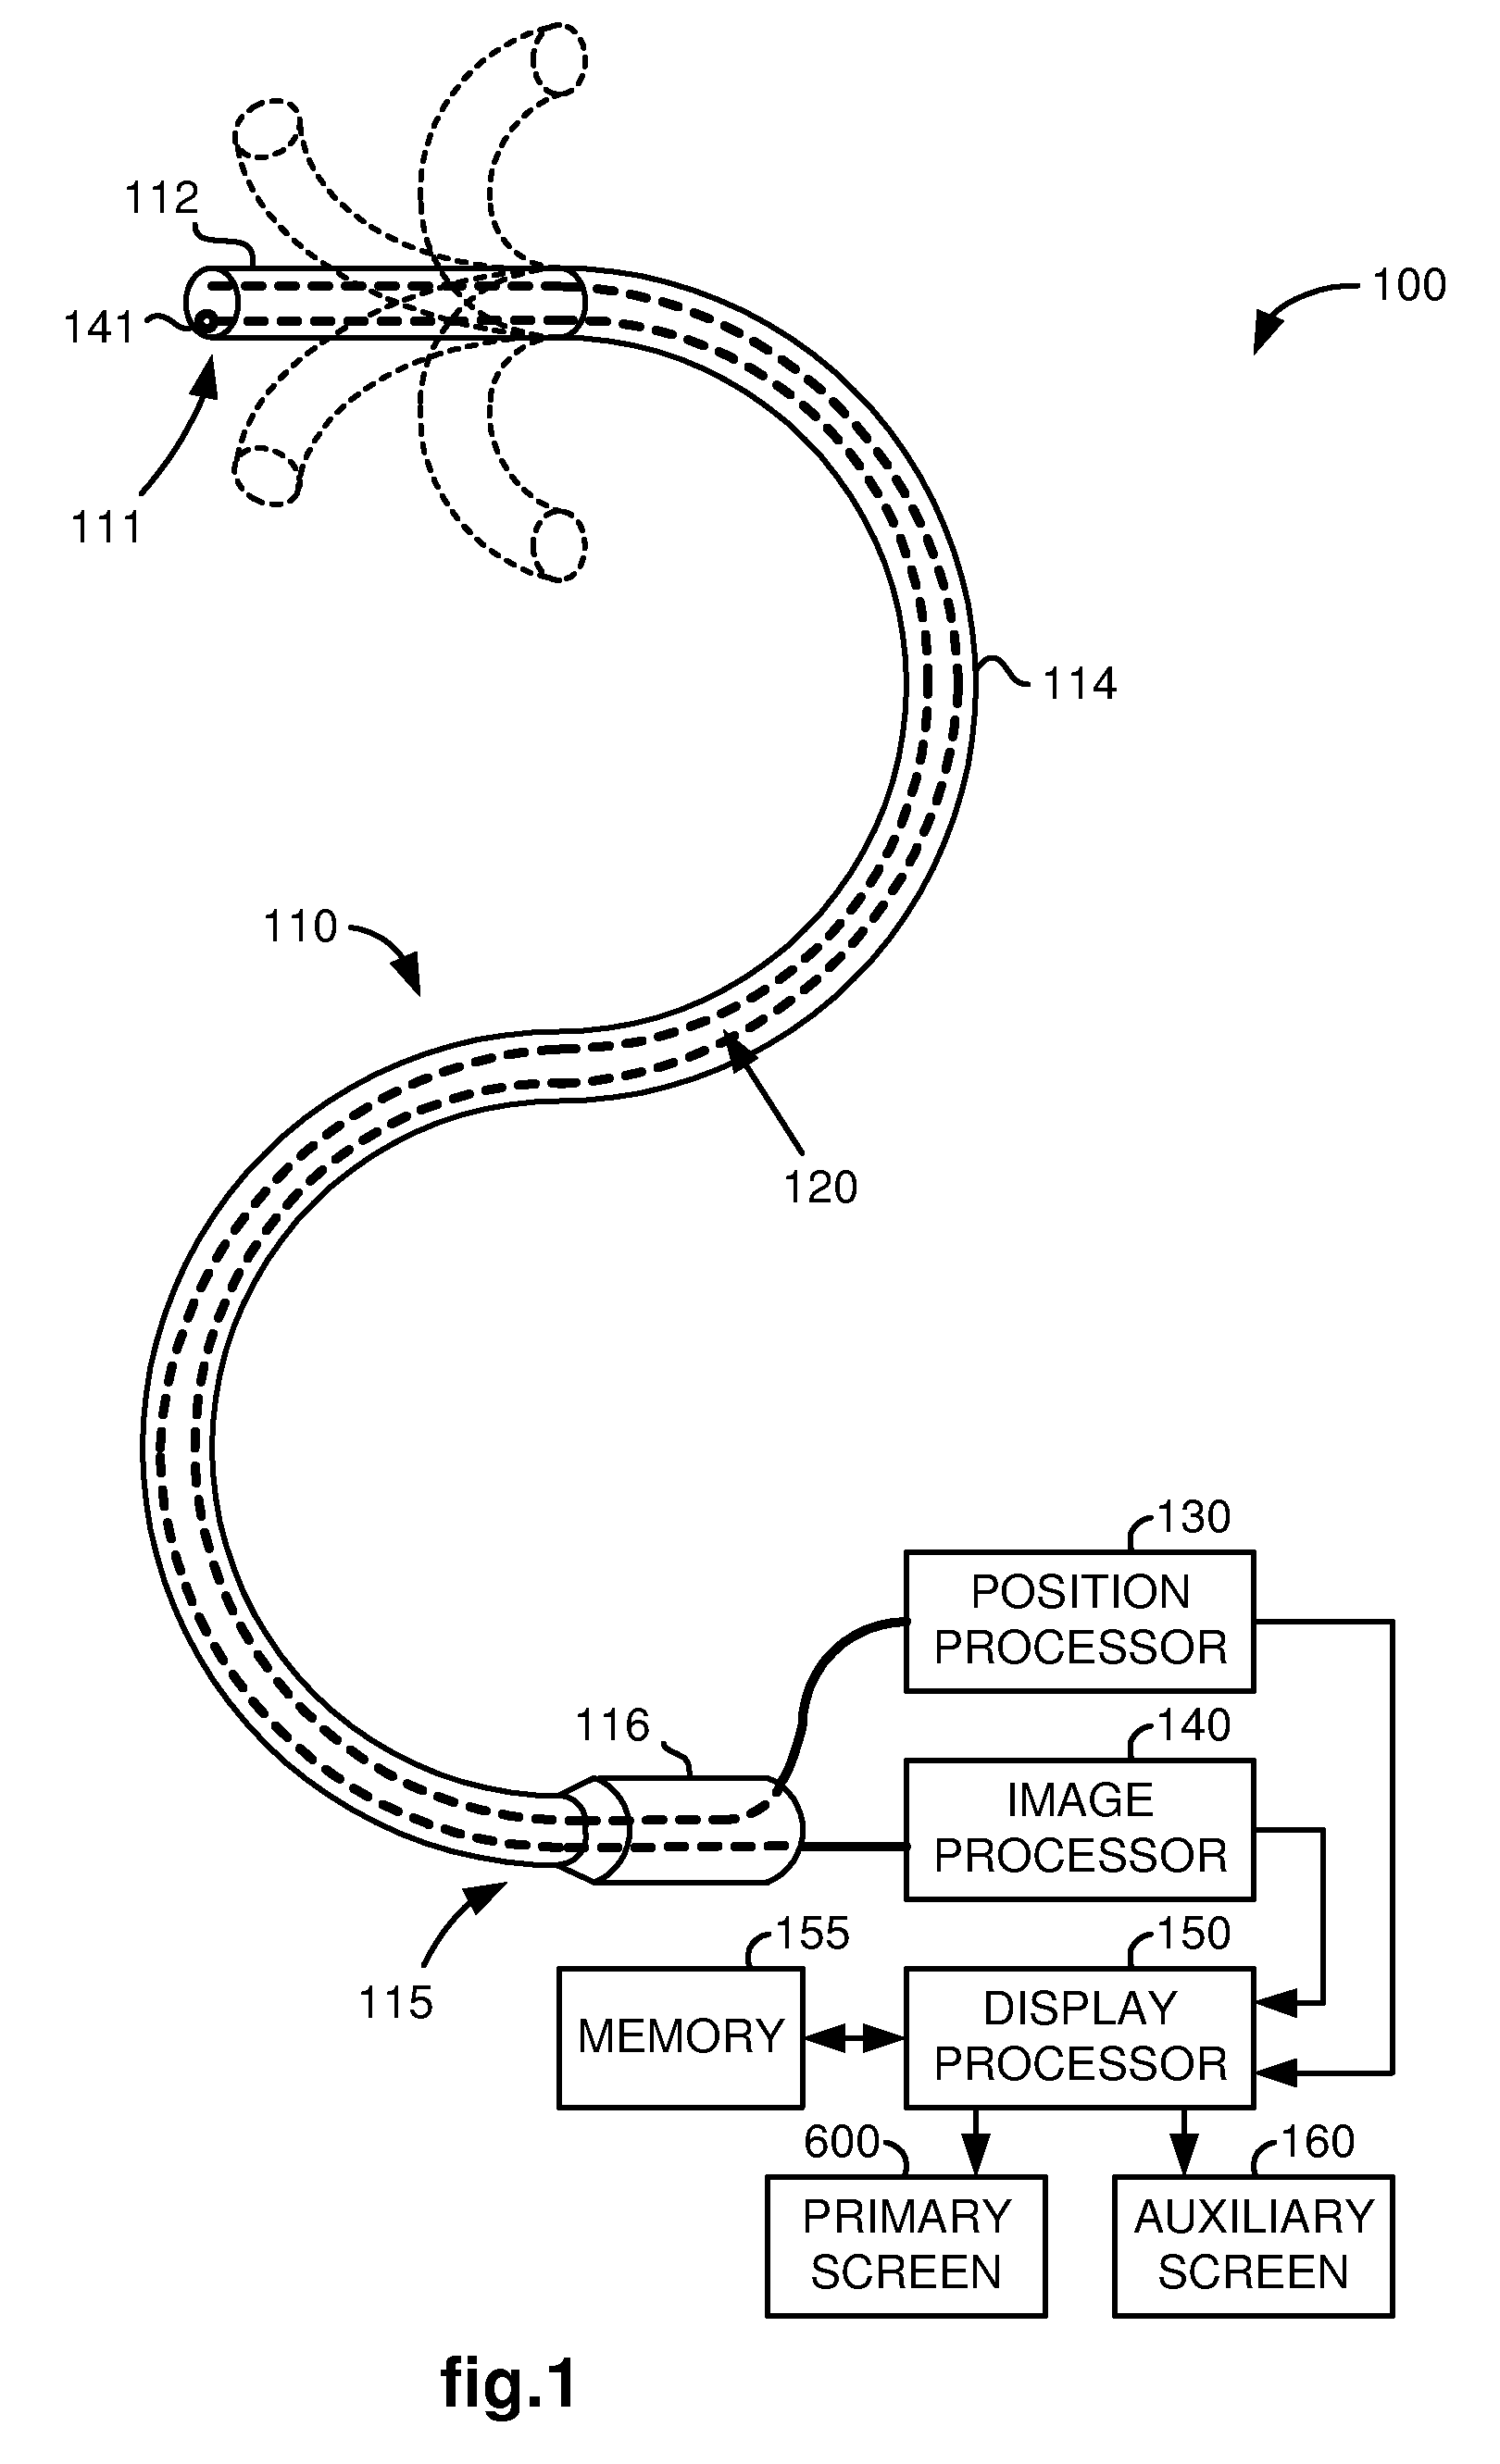 Method and system for providing visual guidance to an operator for steering a tip of an endoscopic device toward one or more landmarks in a patient